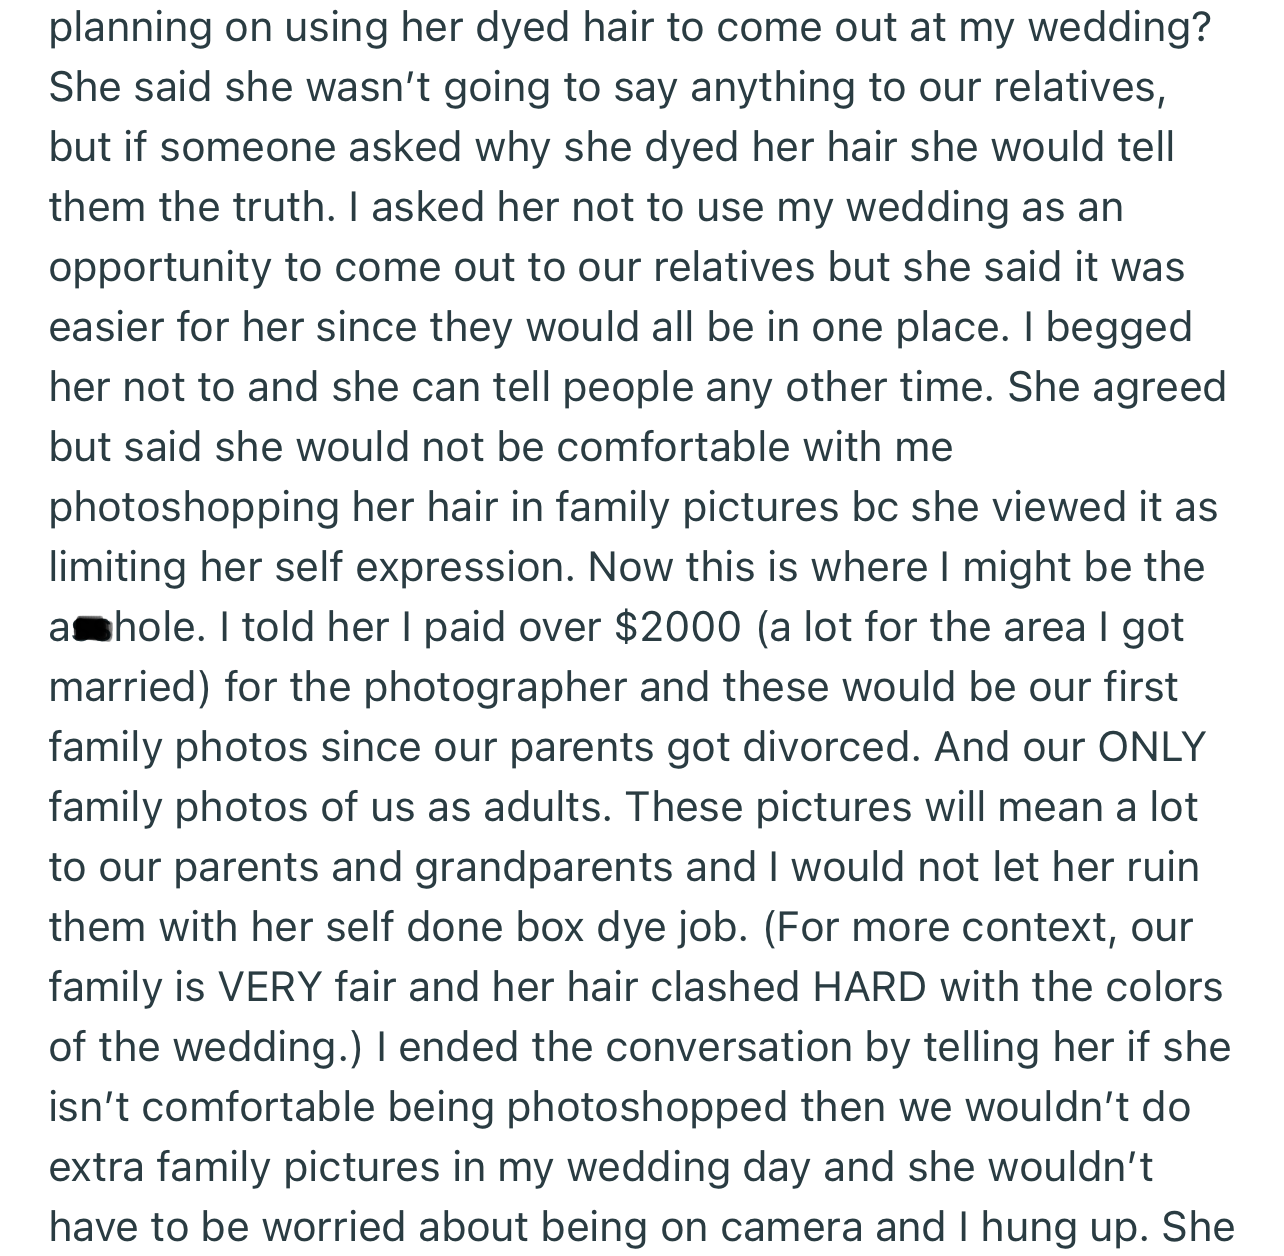 OP made it clear to her sister that she didn’t want her to use the wedding as an opportunity to come out to family. Rather, she can do it any other day